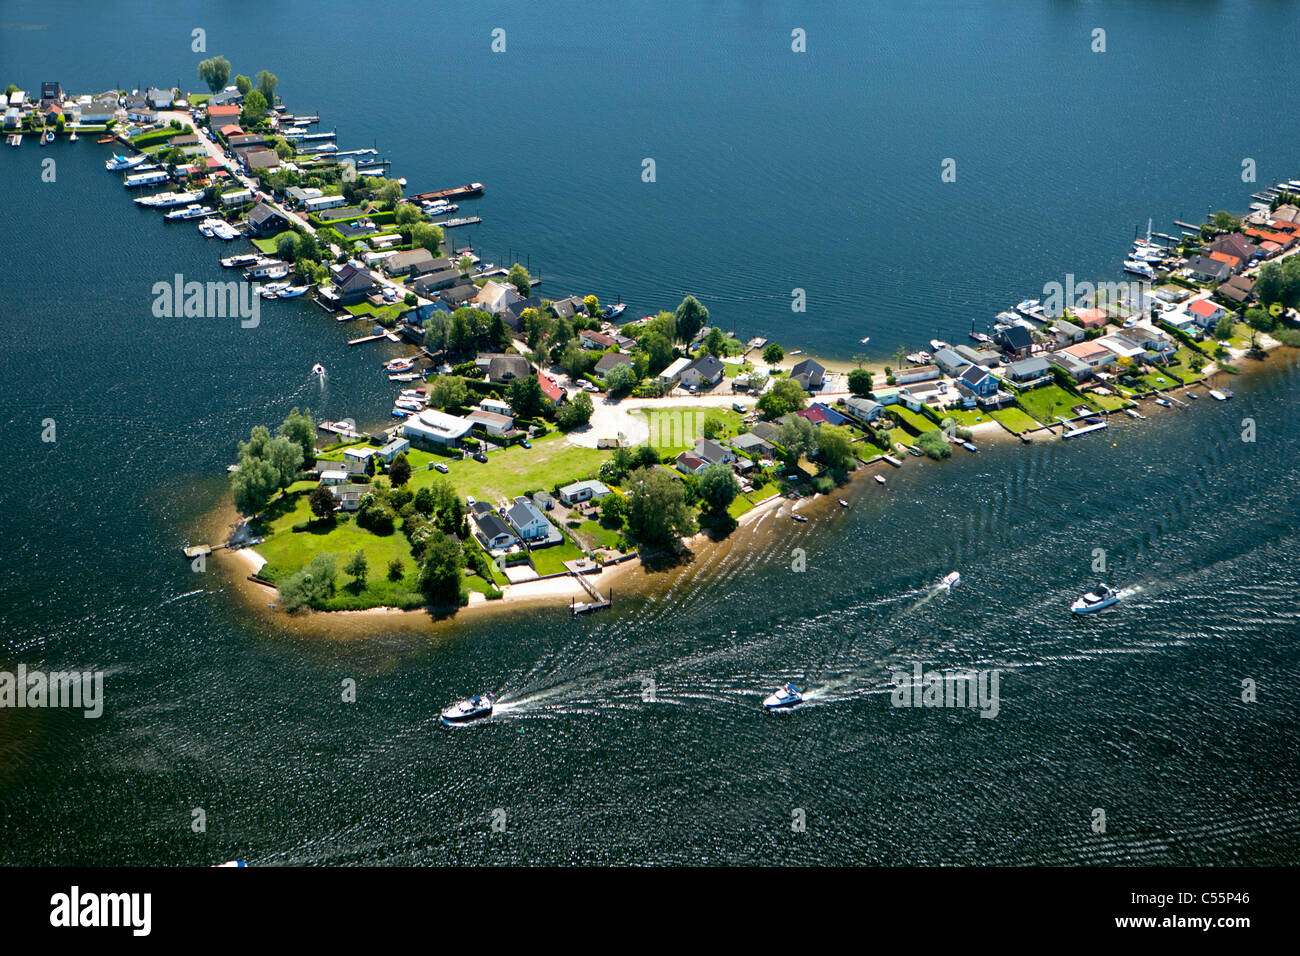 The Netherlands, Veen, Aerial, holiday houses on peninsula. Stock Photo